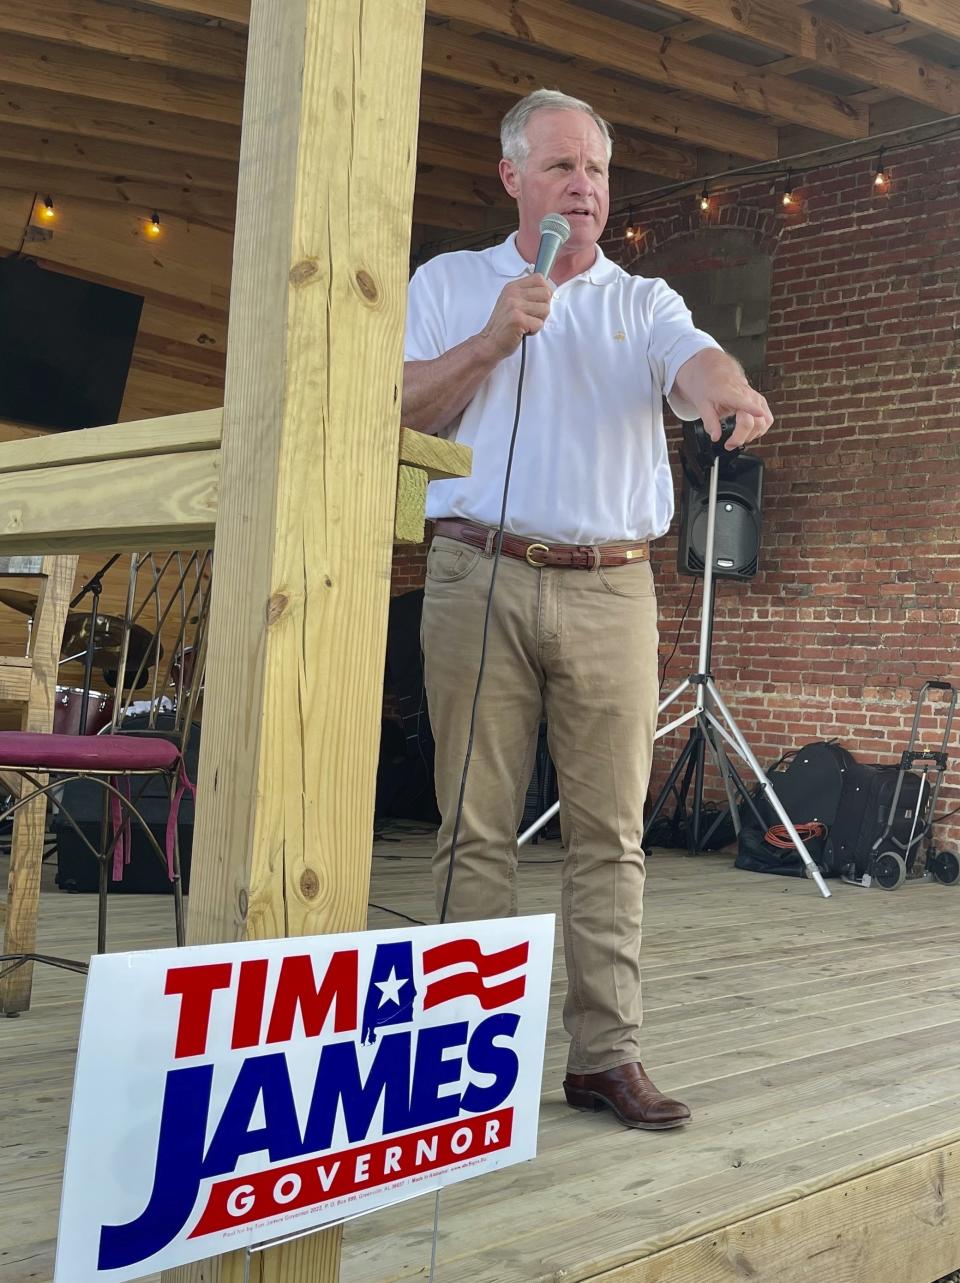 FILE - Alabama Republican gubernatorial candidate Tim James speaks to a crowd in Pike Road, Ala., on May 16, 2022. James is part of a crowded field challenging Alabama Gov. Kay Ivey in the May 24, 2022, Republican primary. (AP Photo/Kim Chandler, File)